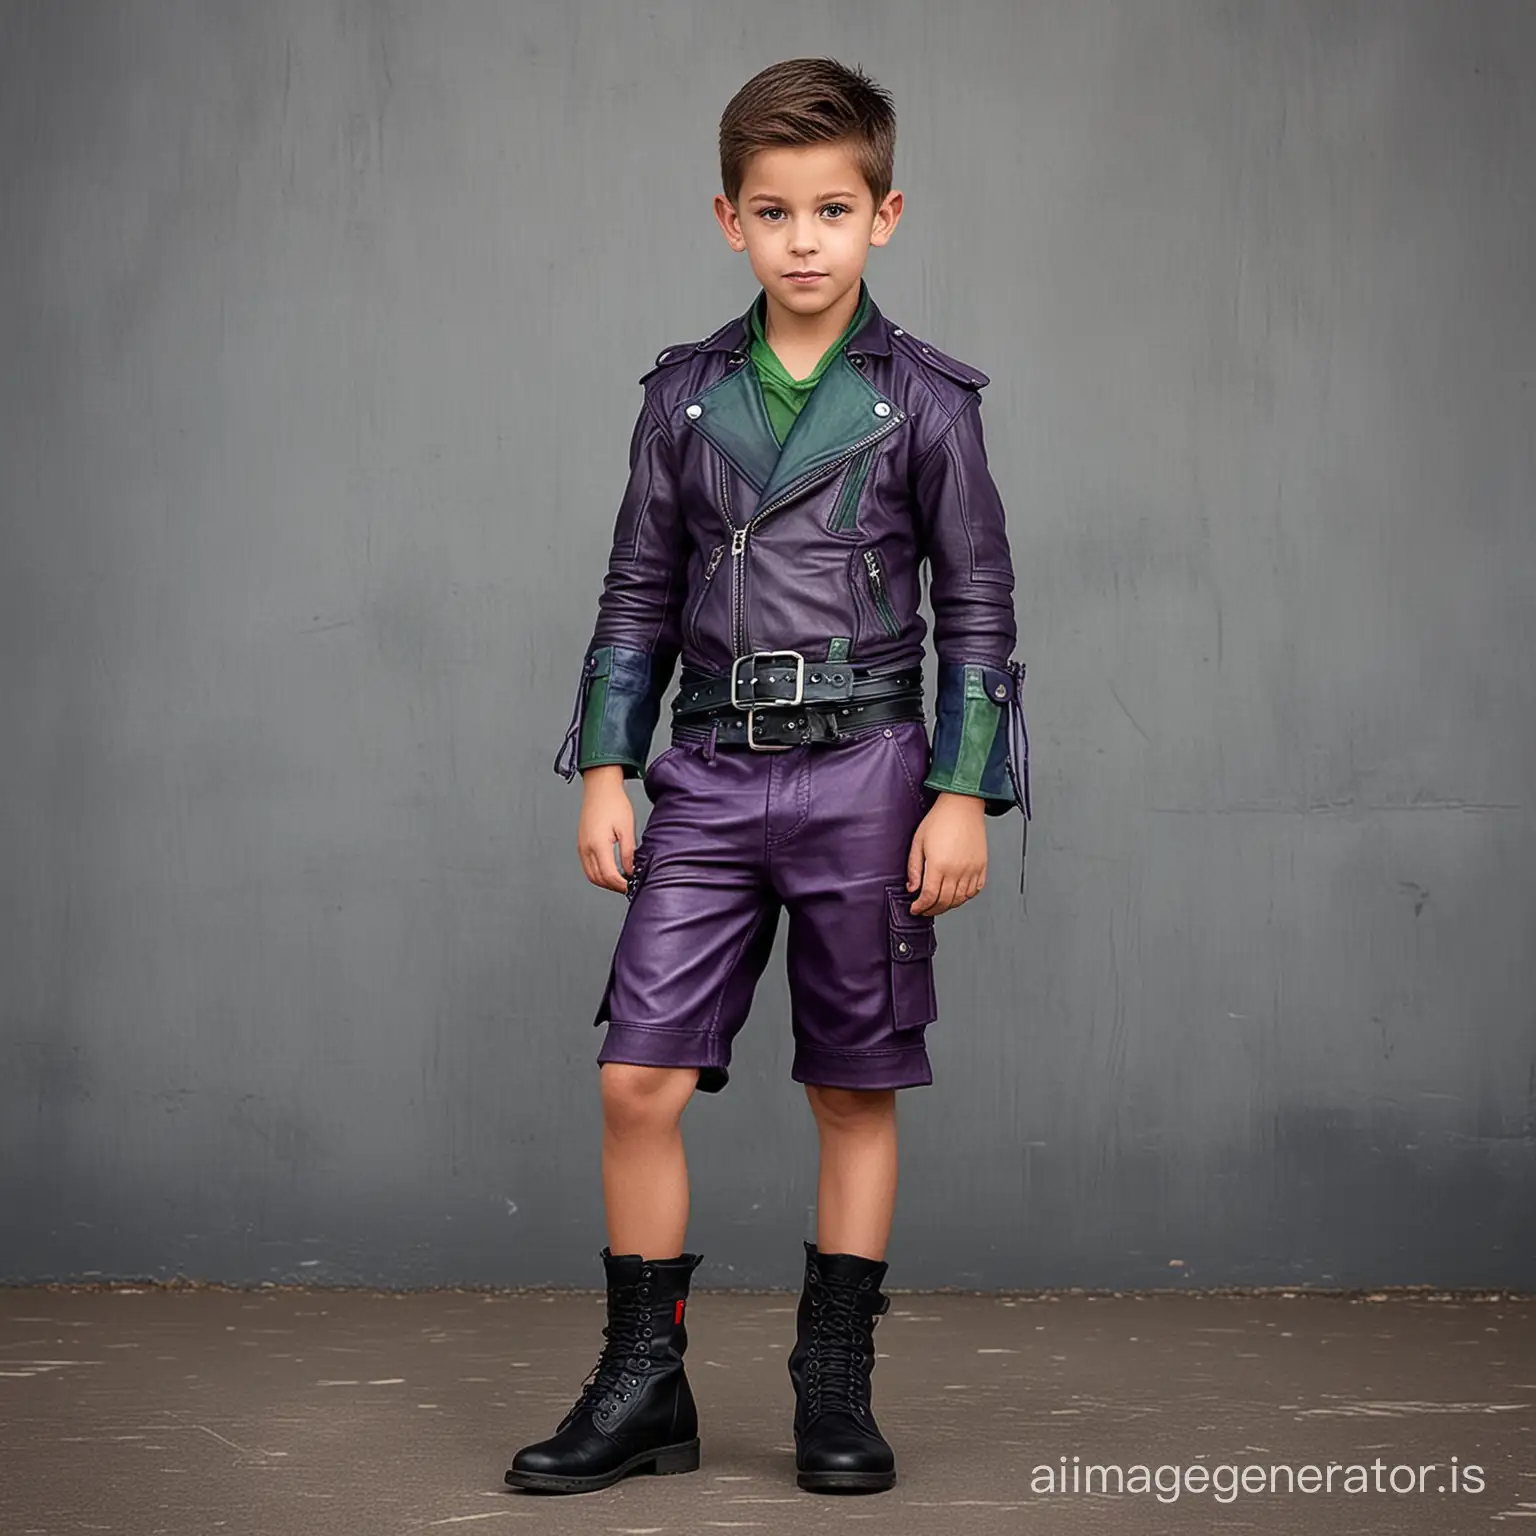 Intimidating-Young-Boy-Villain-in-Colorful-Leather-Outfit